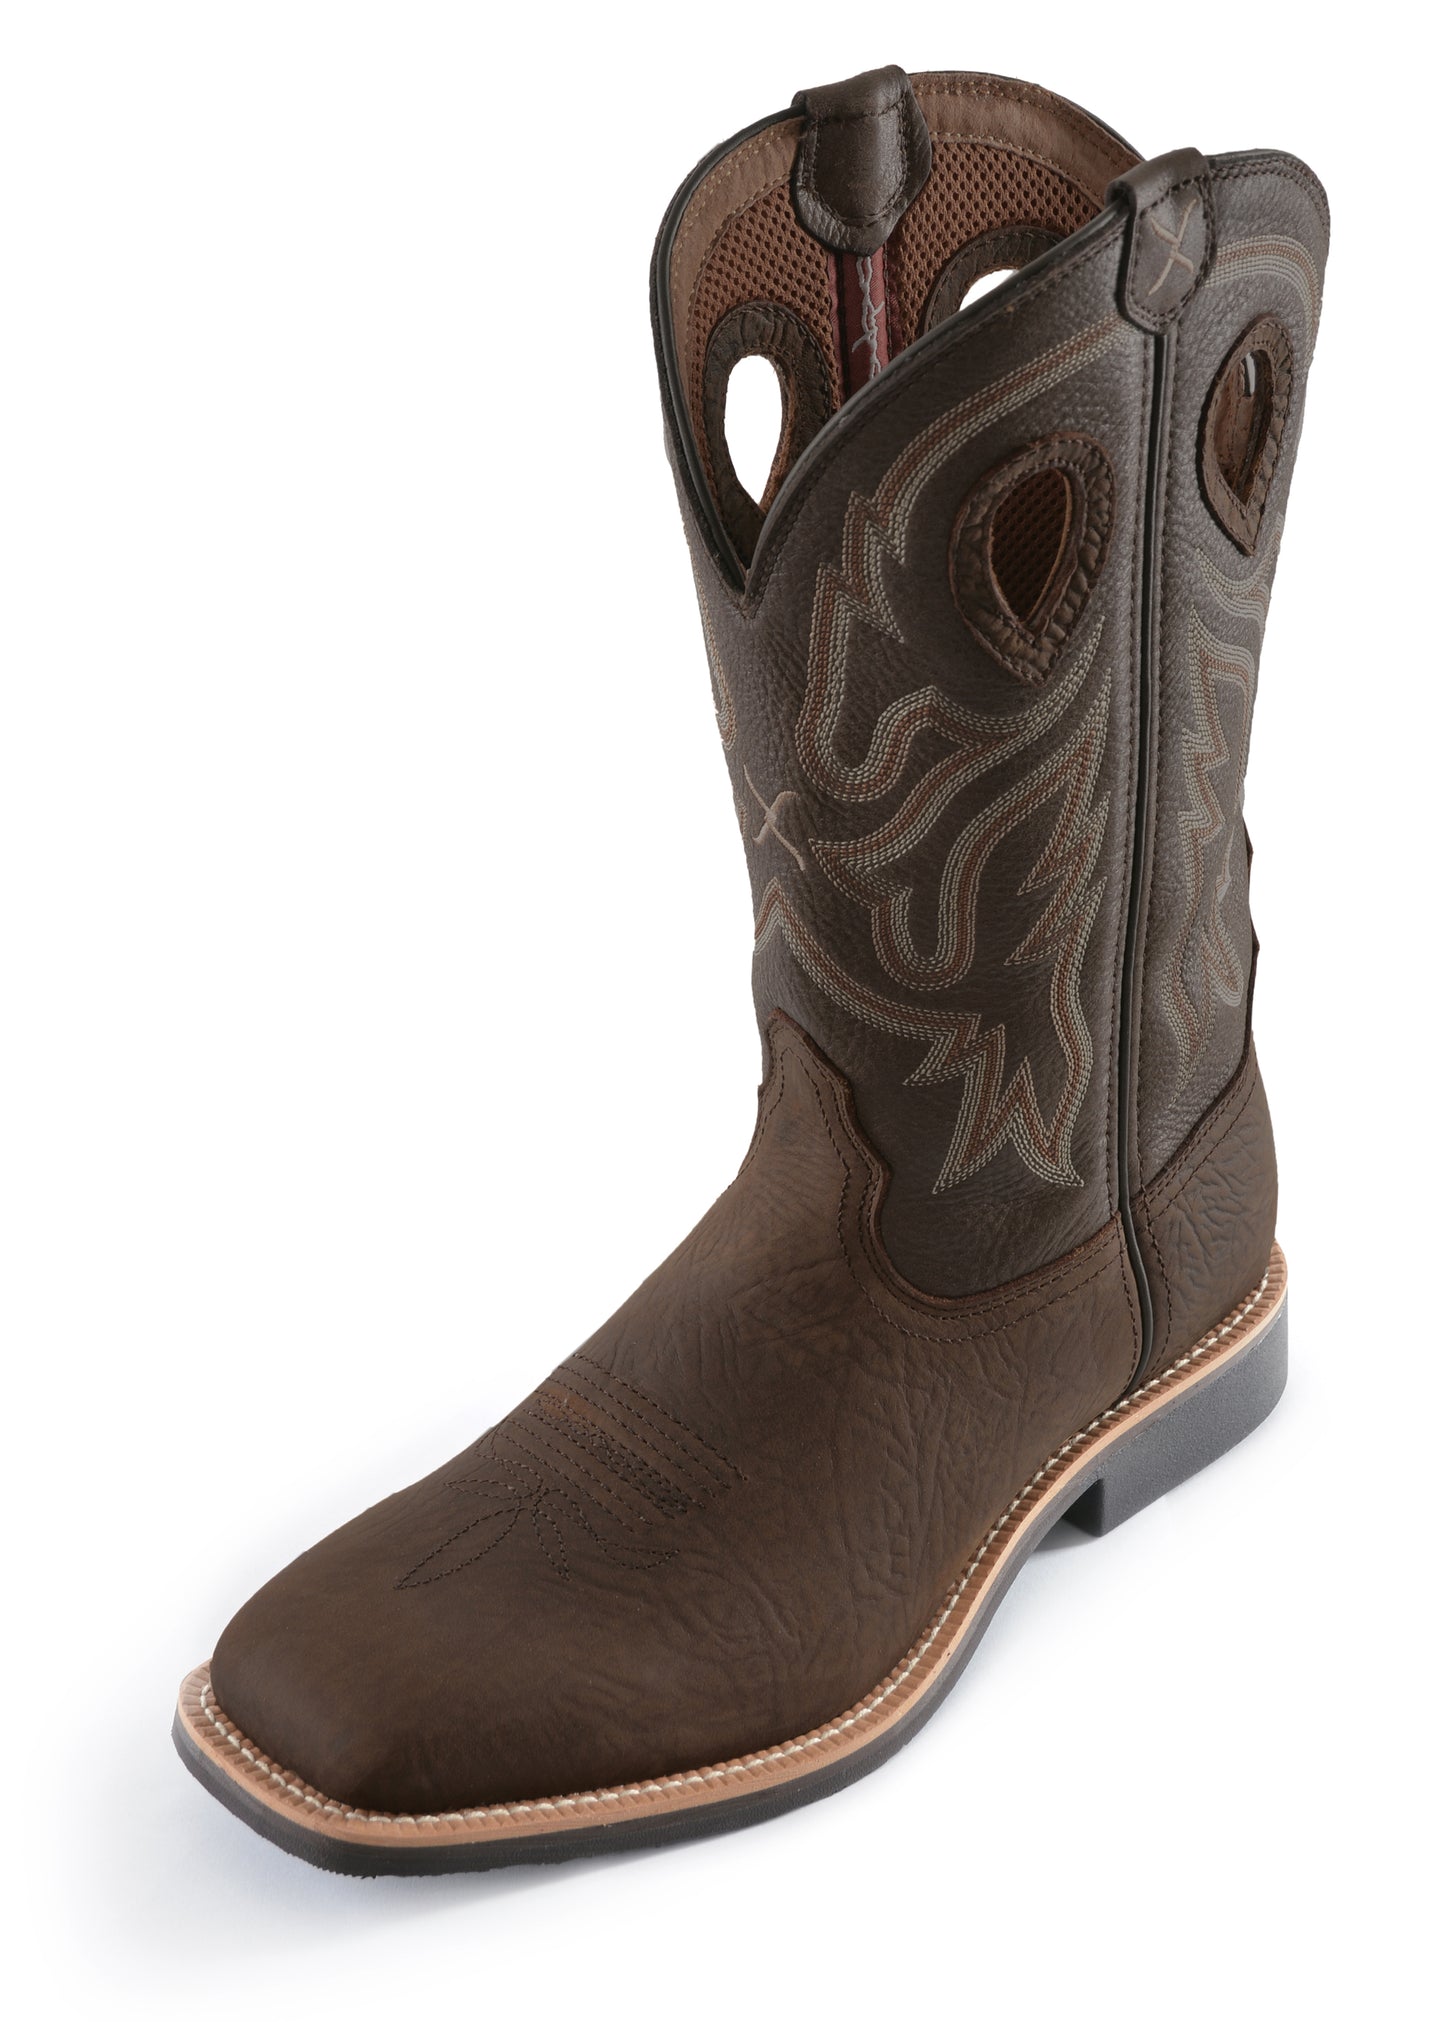 Twisted X Mens Top Hand Boot - Taupe/Brown - TCMTH0025